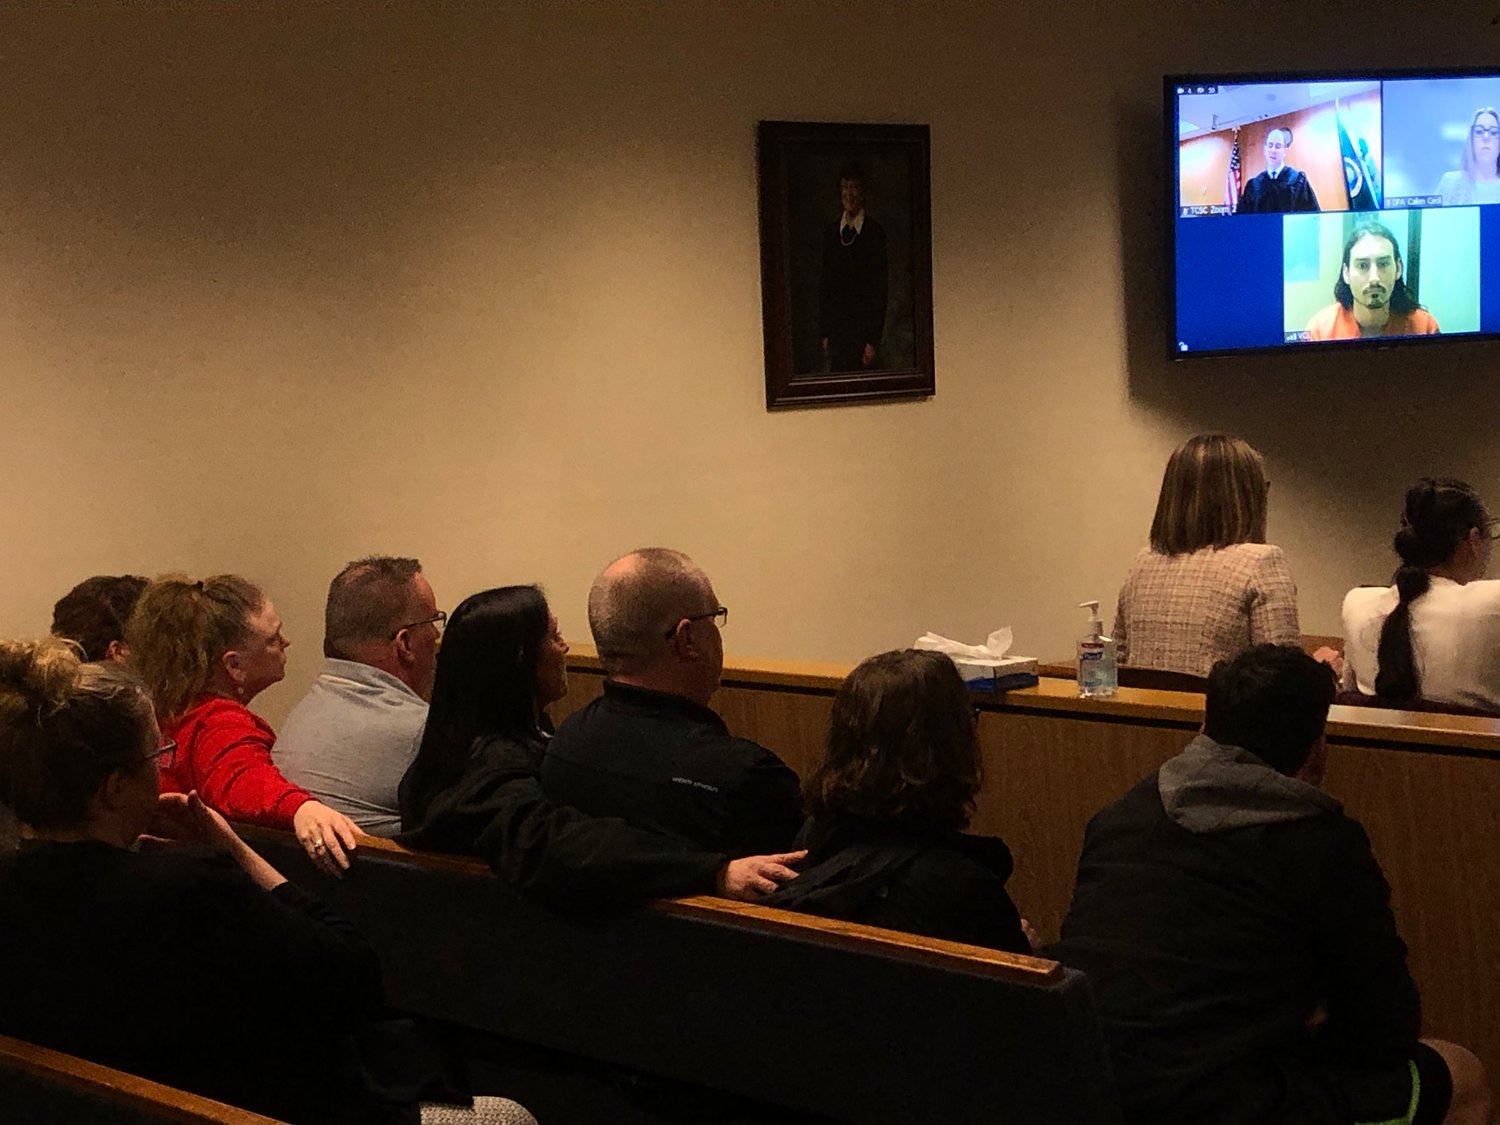 Members of the family of the infant prosecutors say was murdered appeared at the bail hearing for Eric Richard Boudreau on March 24, 2023. The defendant appears in the lower image on the video screen.